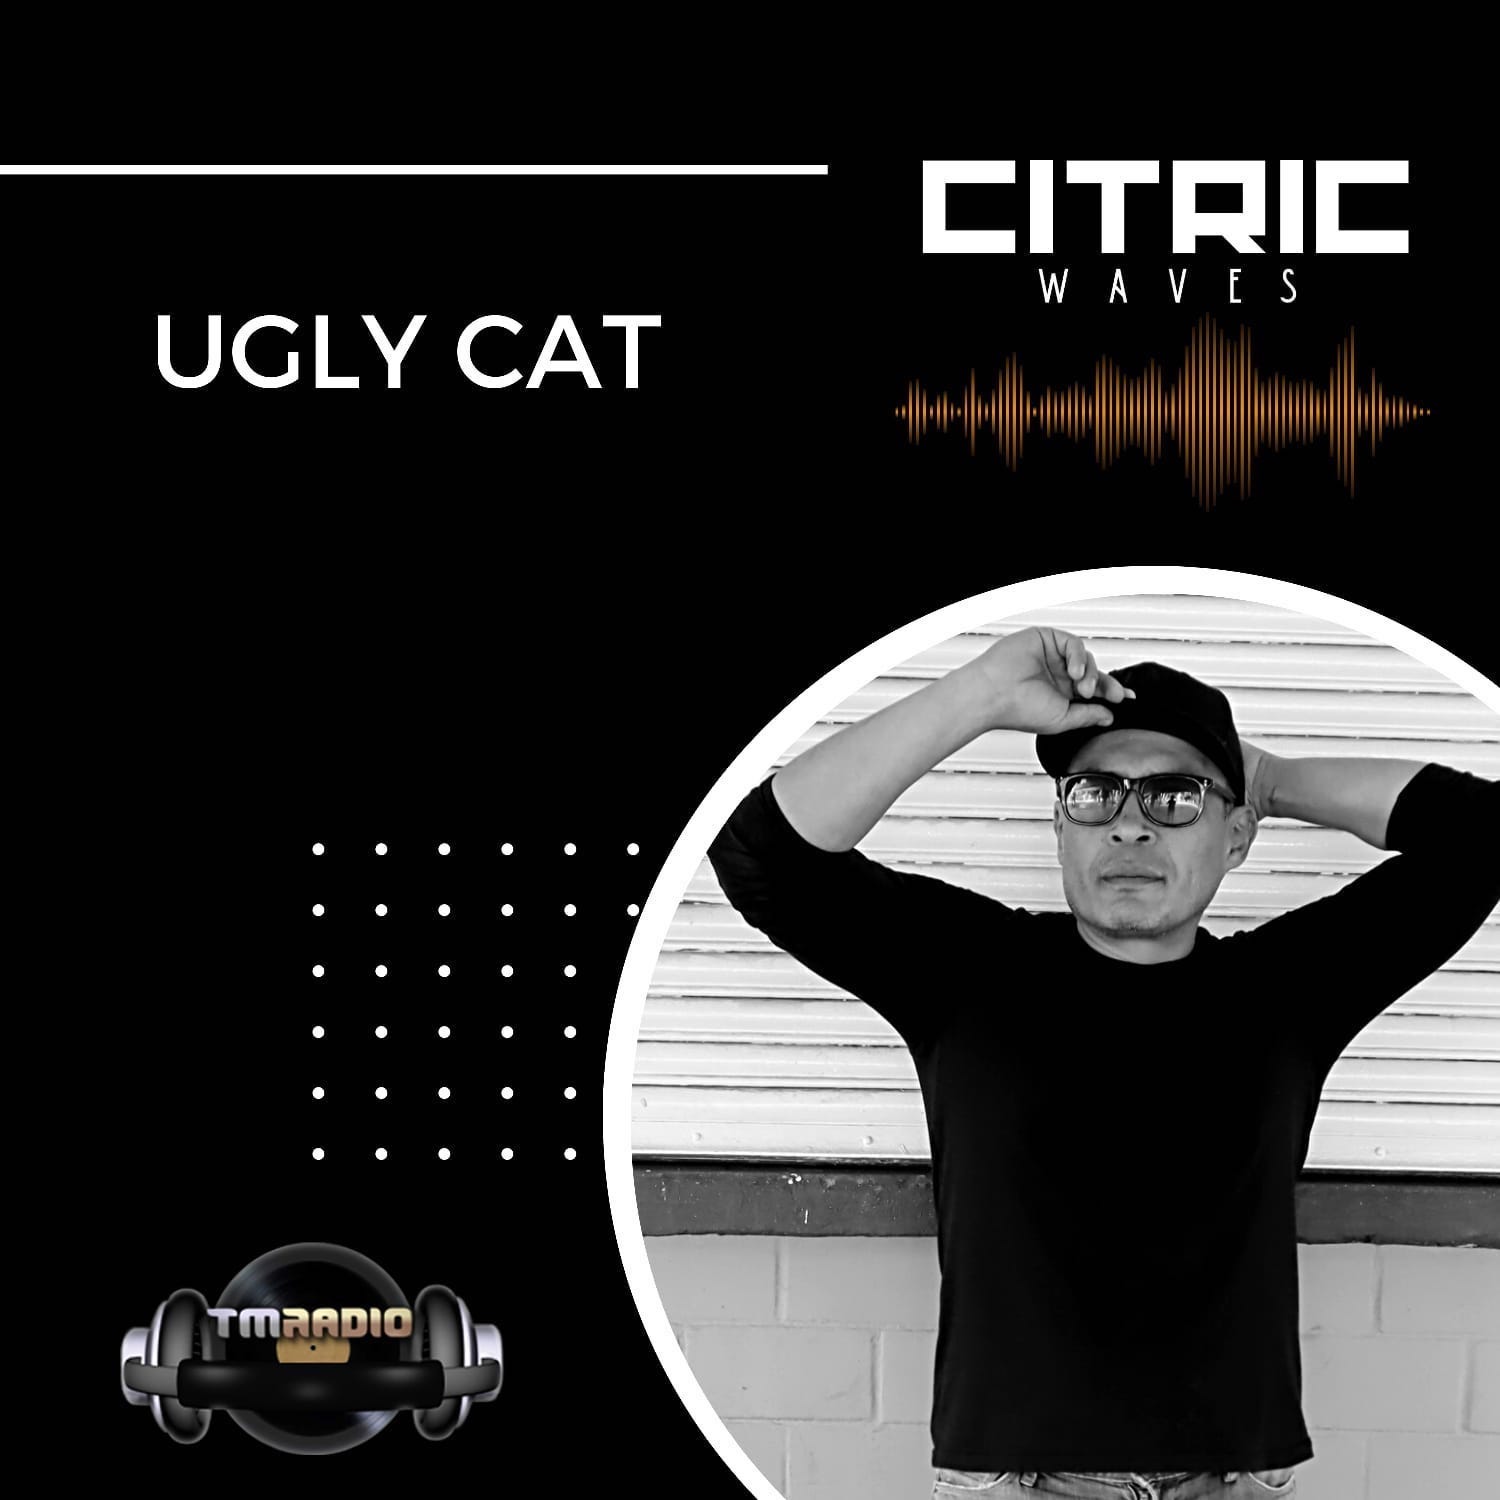 Citric Waves 008 Ugly Cat (from January 11th)